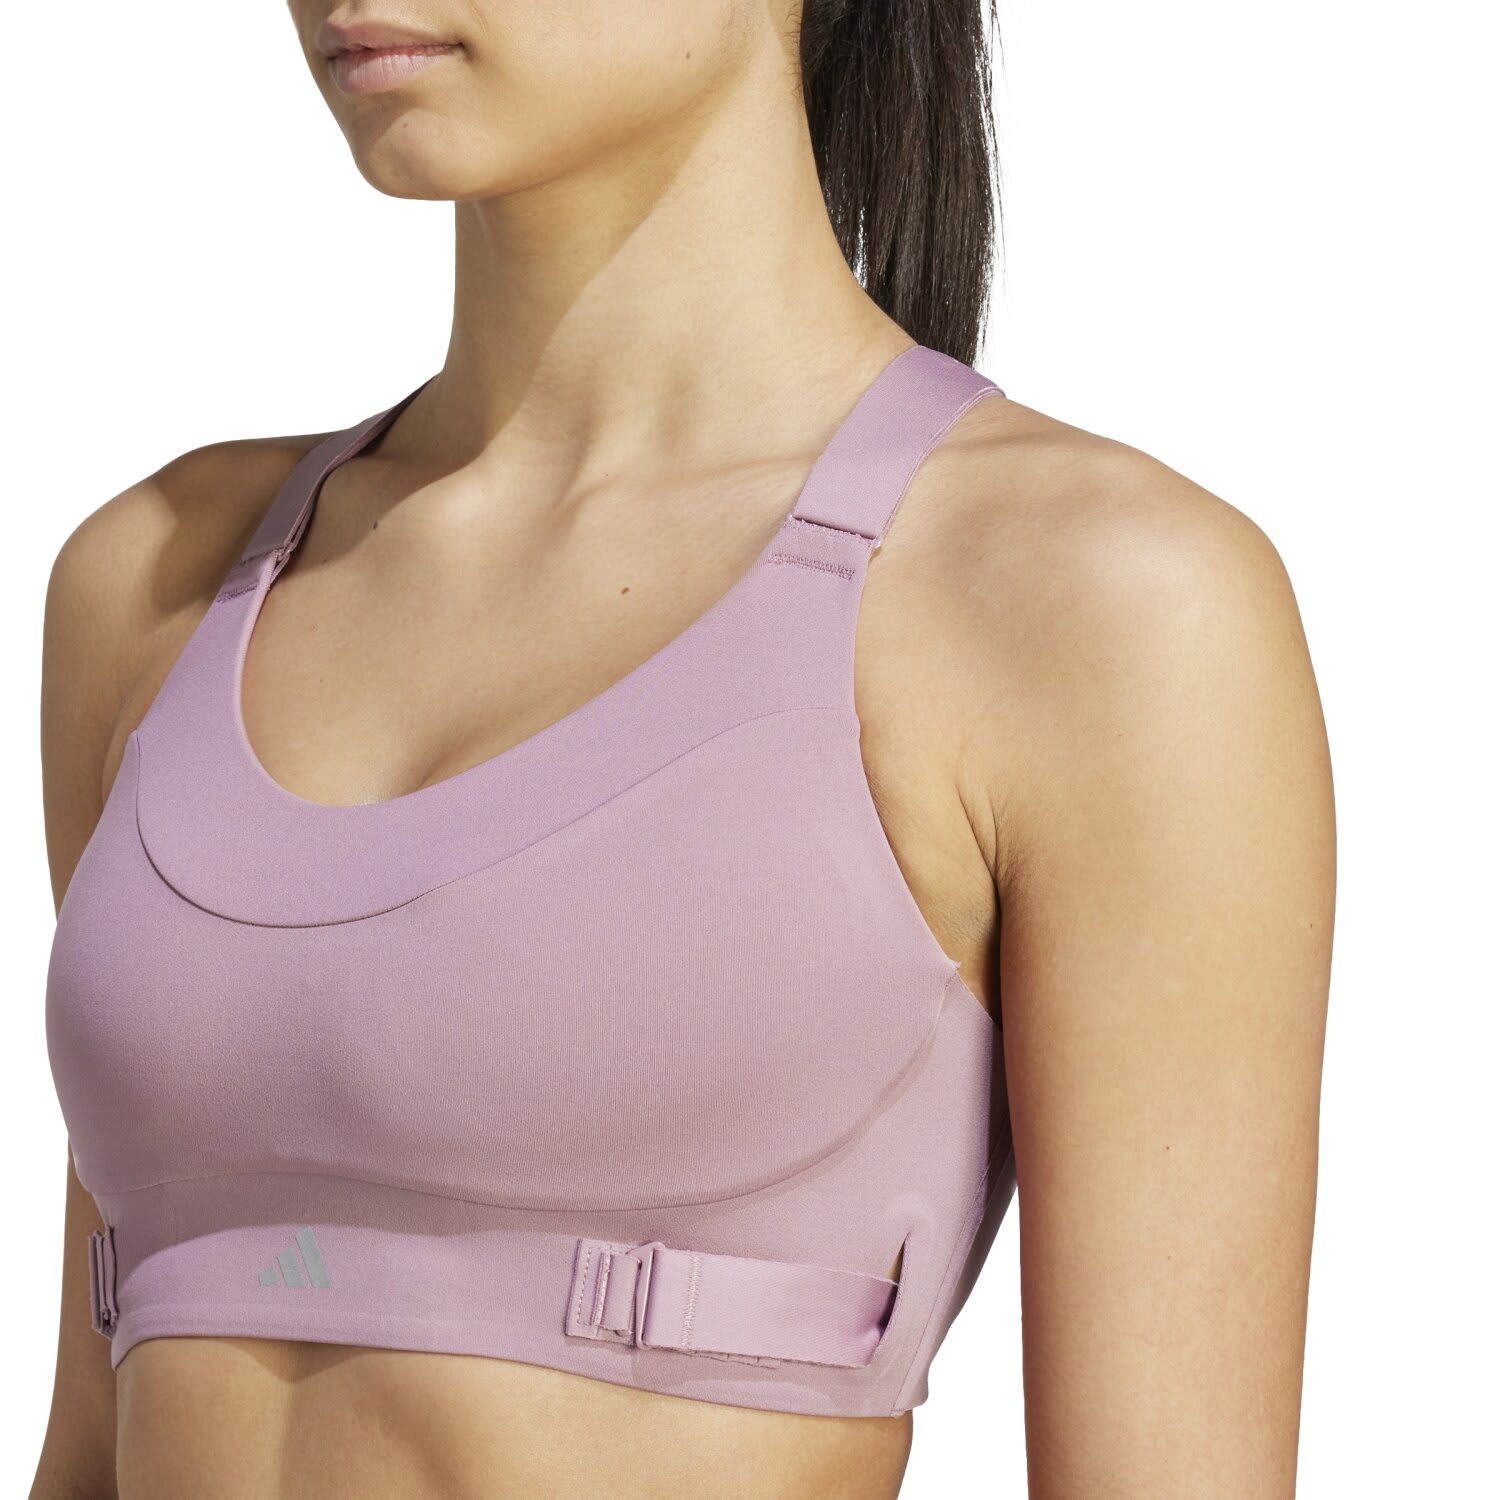 adidas Fastimpact Luxe Run High-Support Bra Review: For all shapes